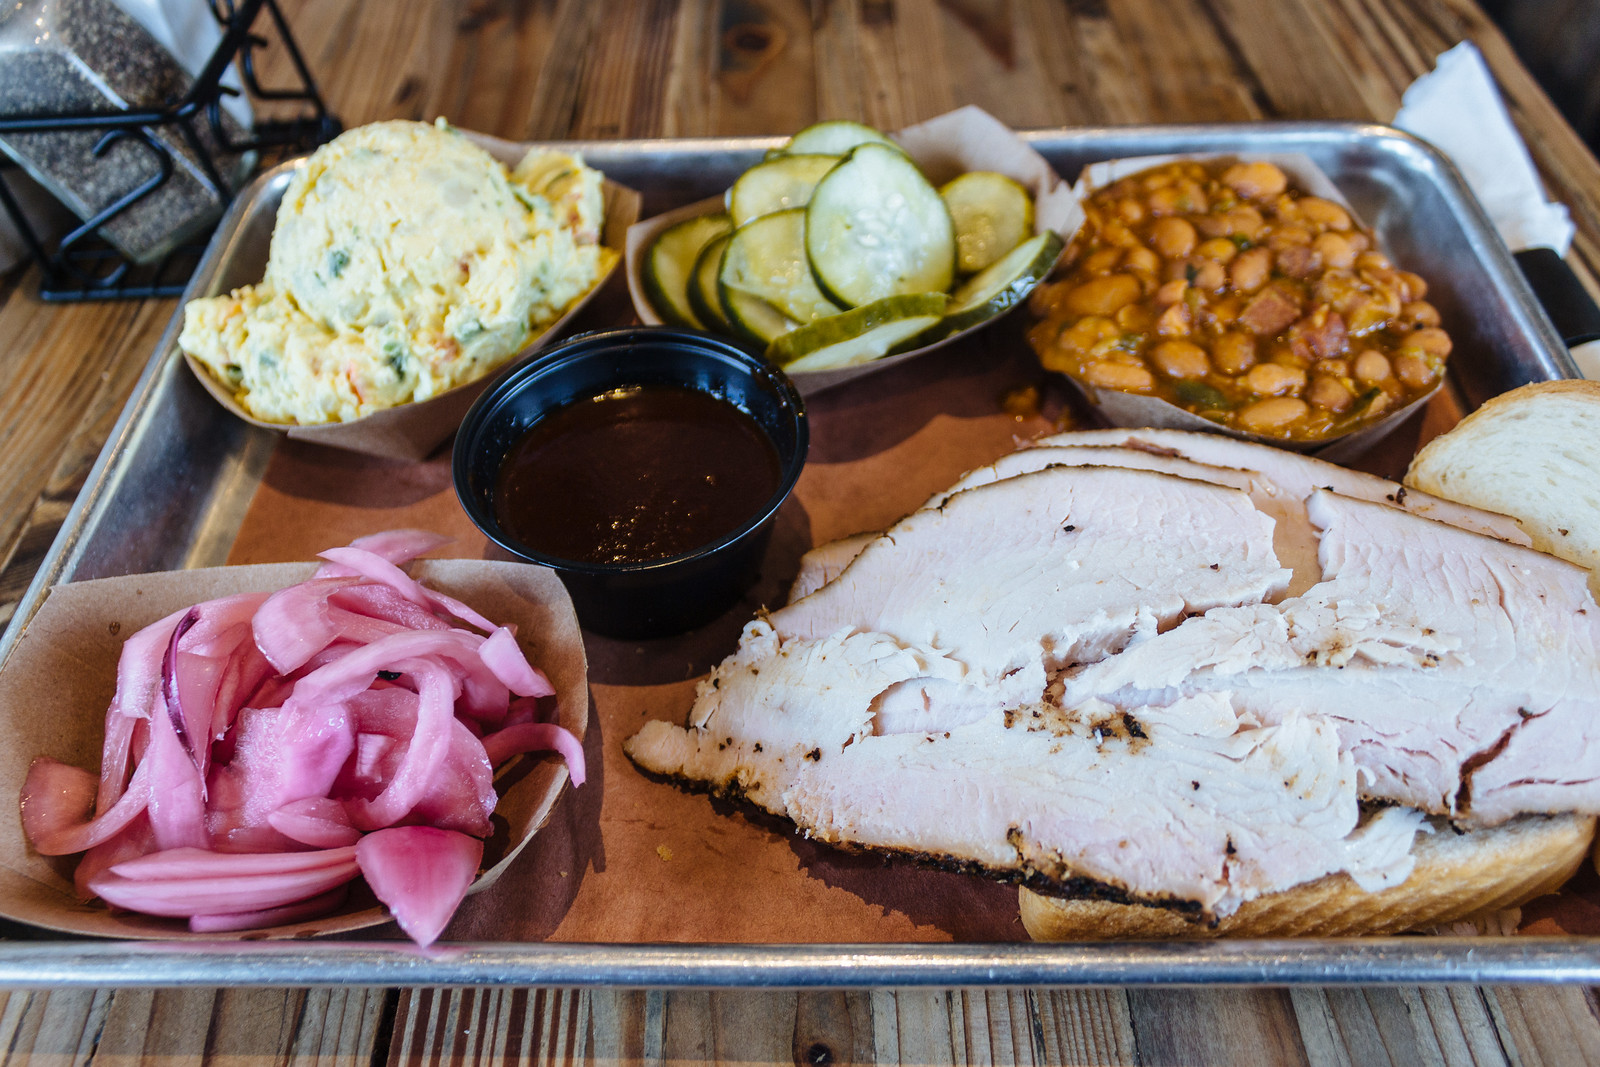 Tray with slices of barbecue turkey meat, pickled red onions, potato salad, pickles, and beans